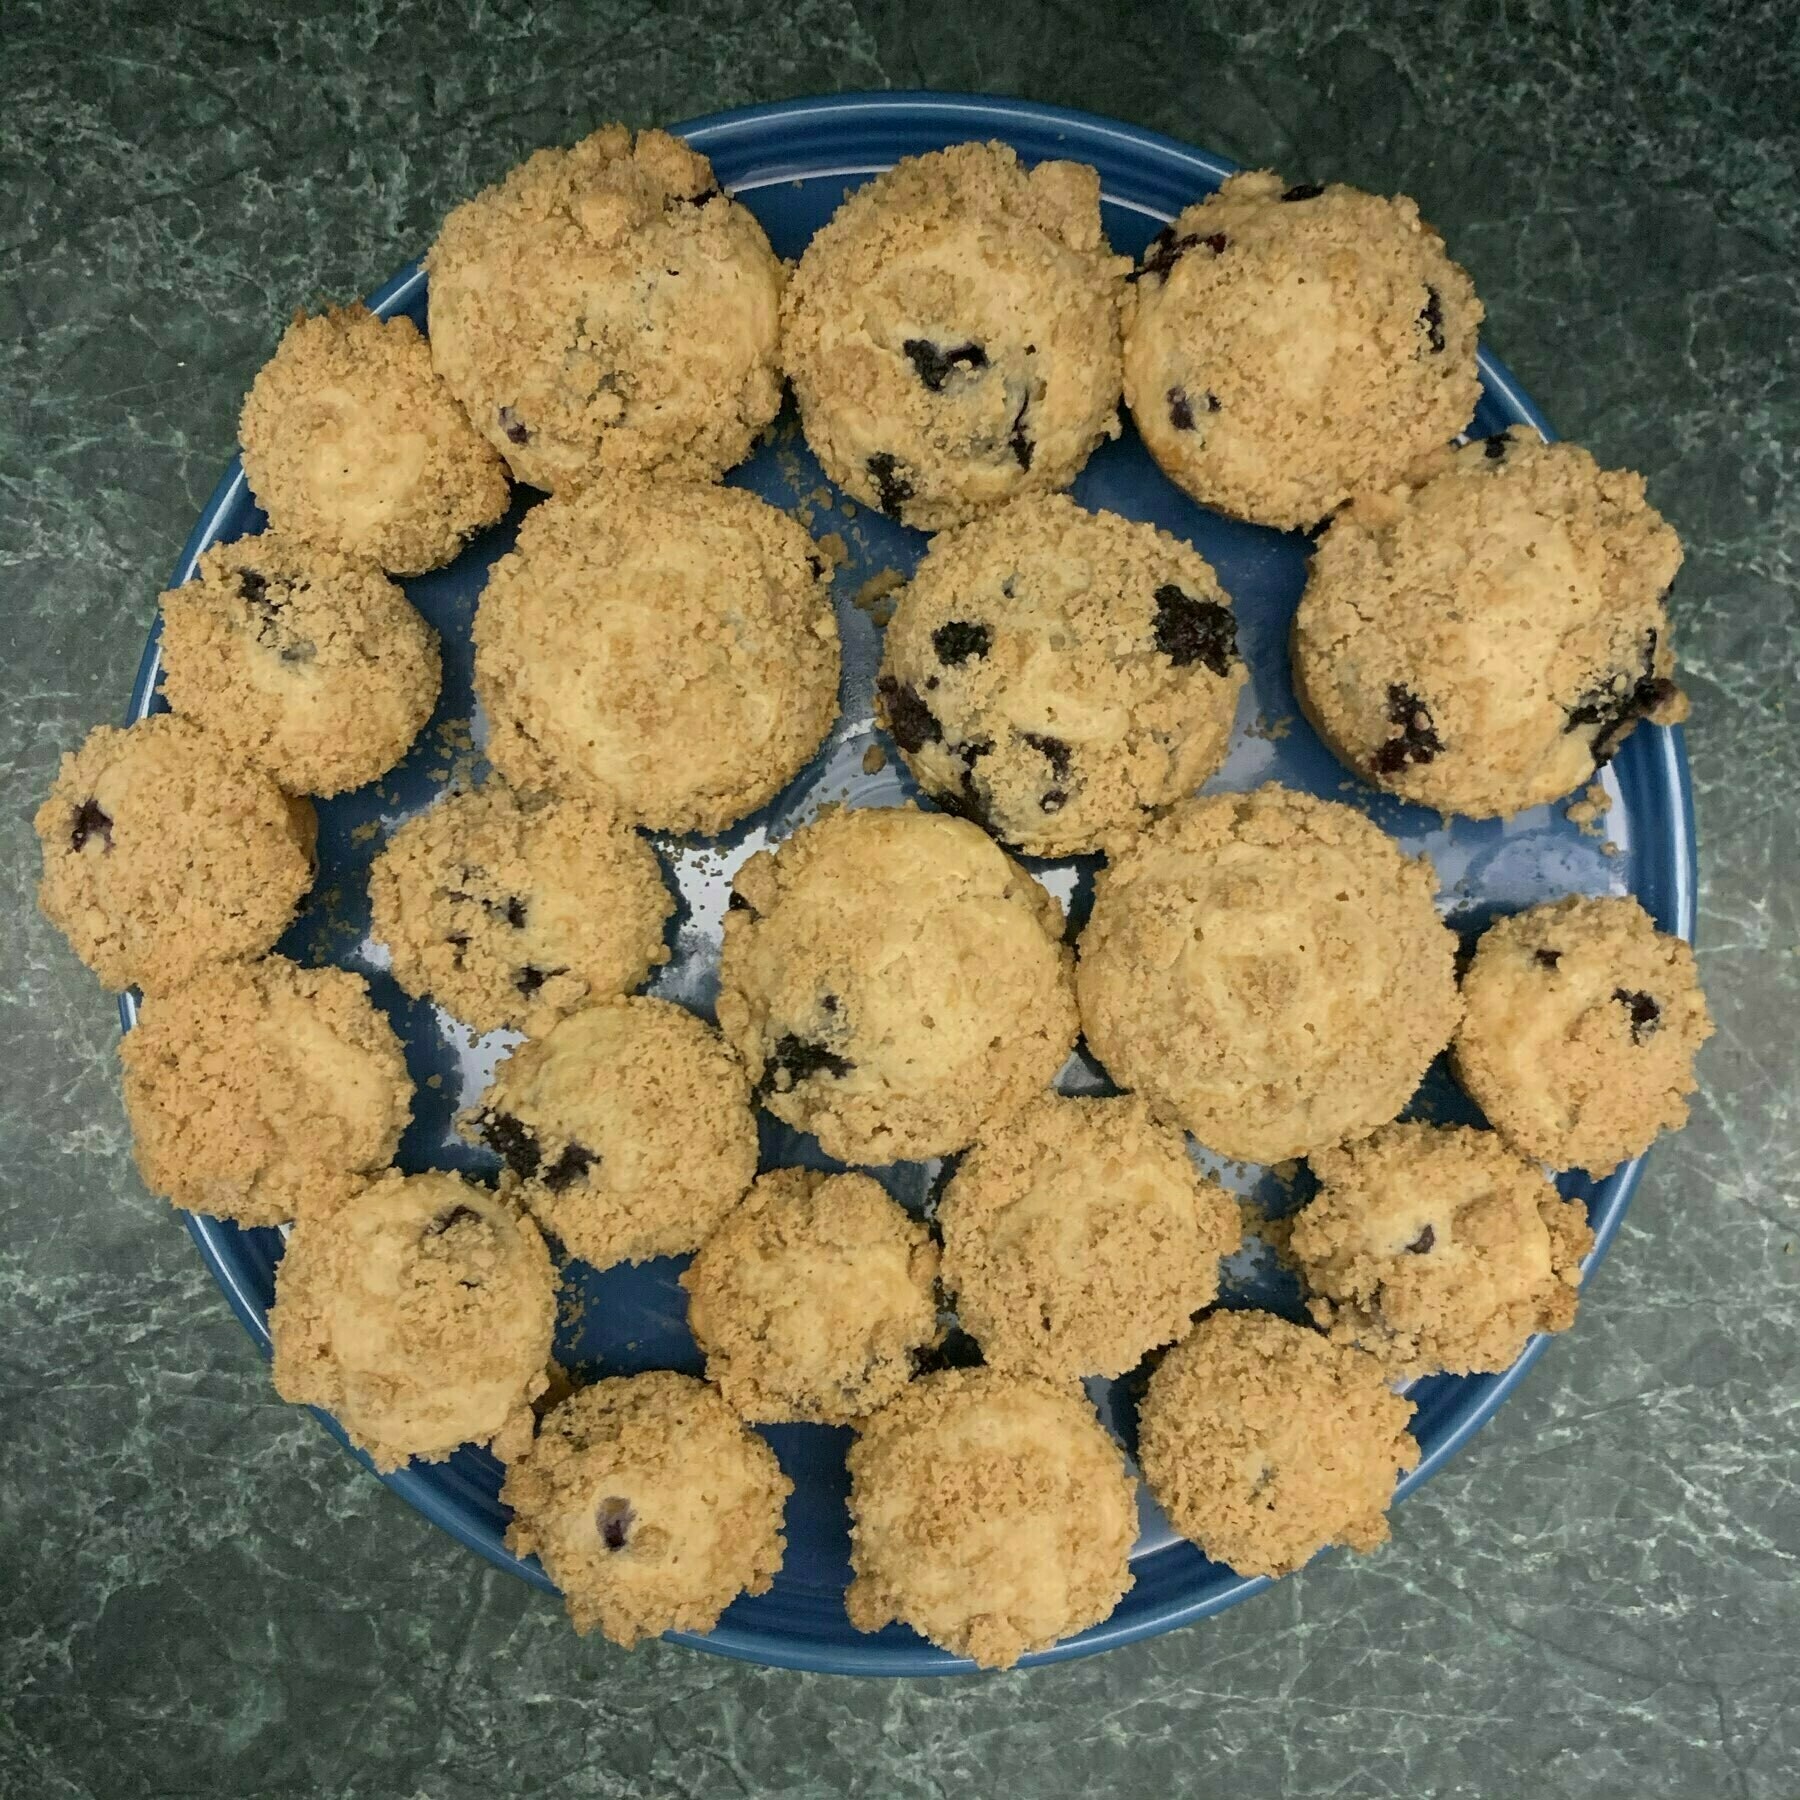 Muffins arranged on a tray